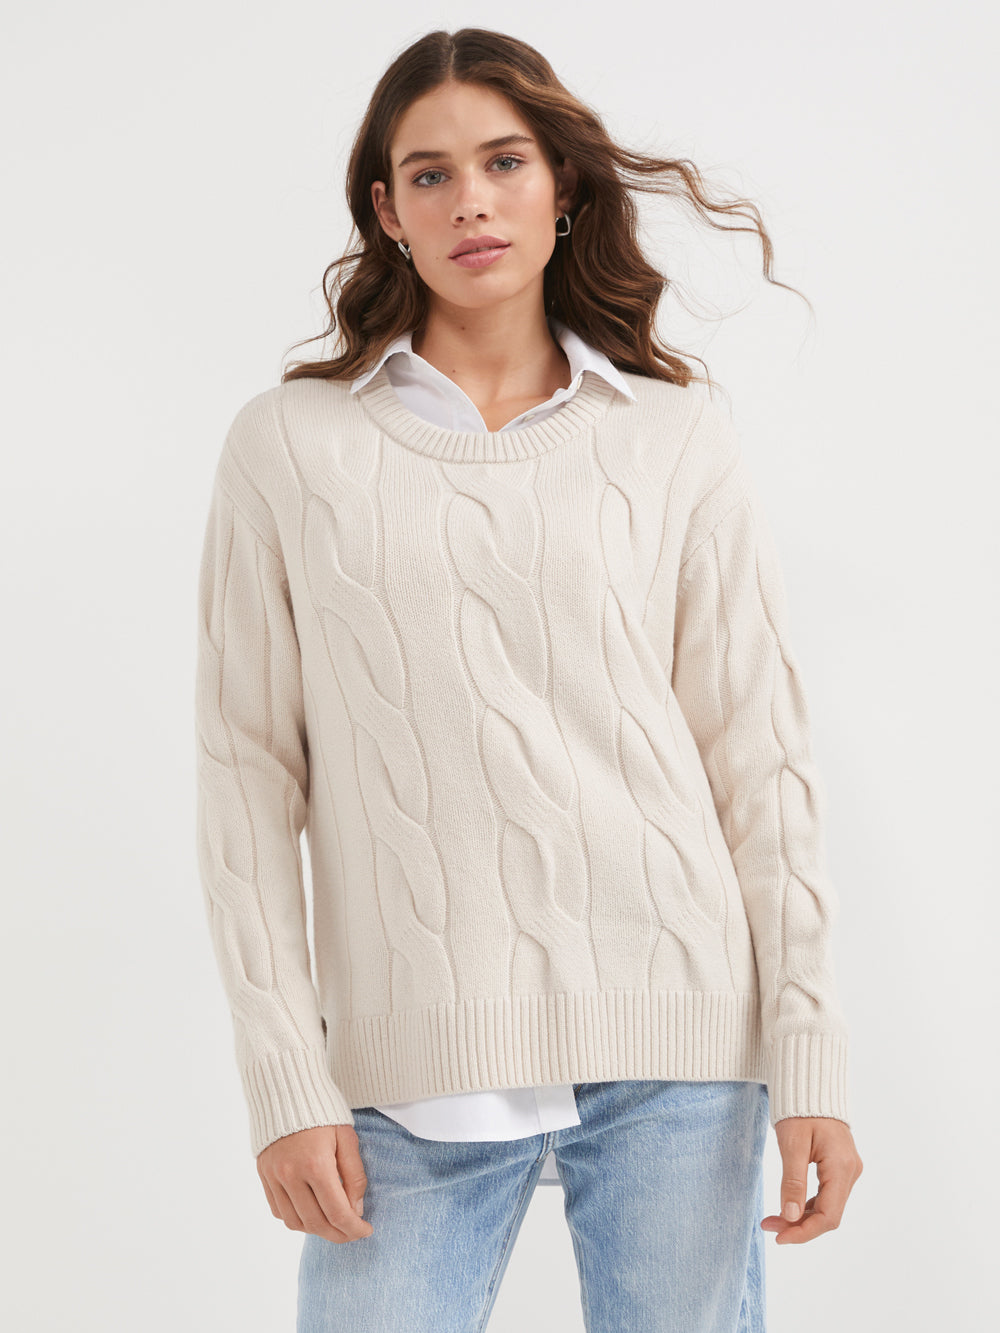 The Soft Wool Cable Knit